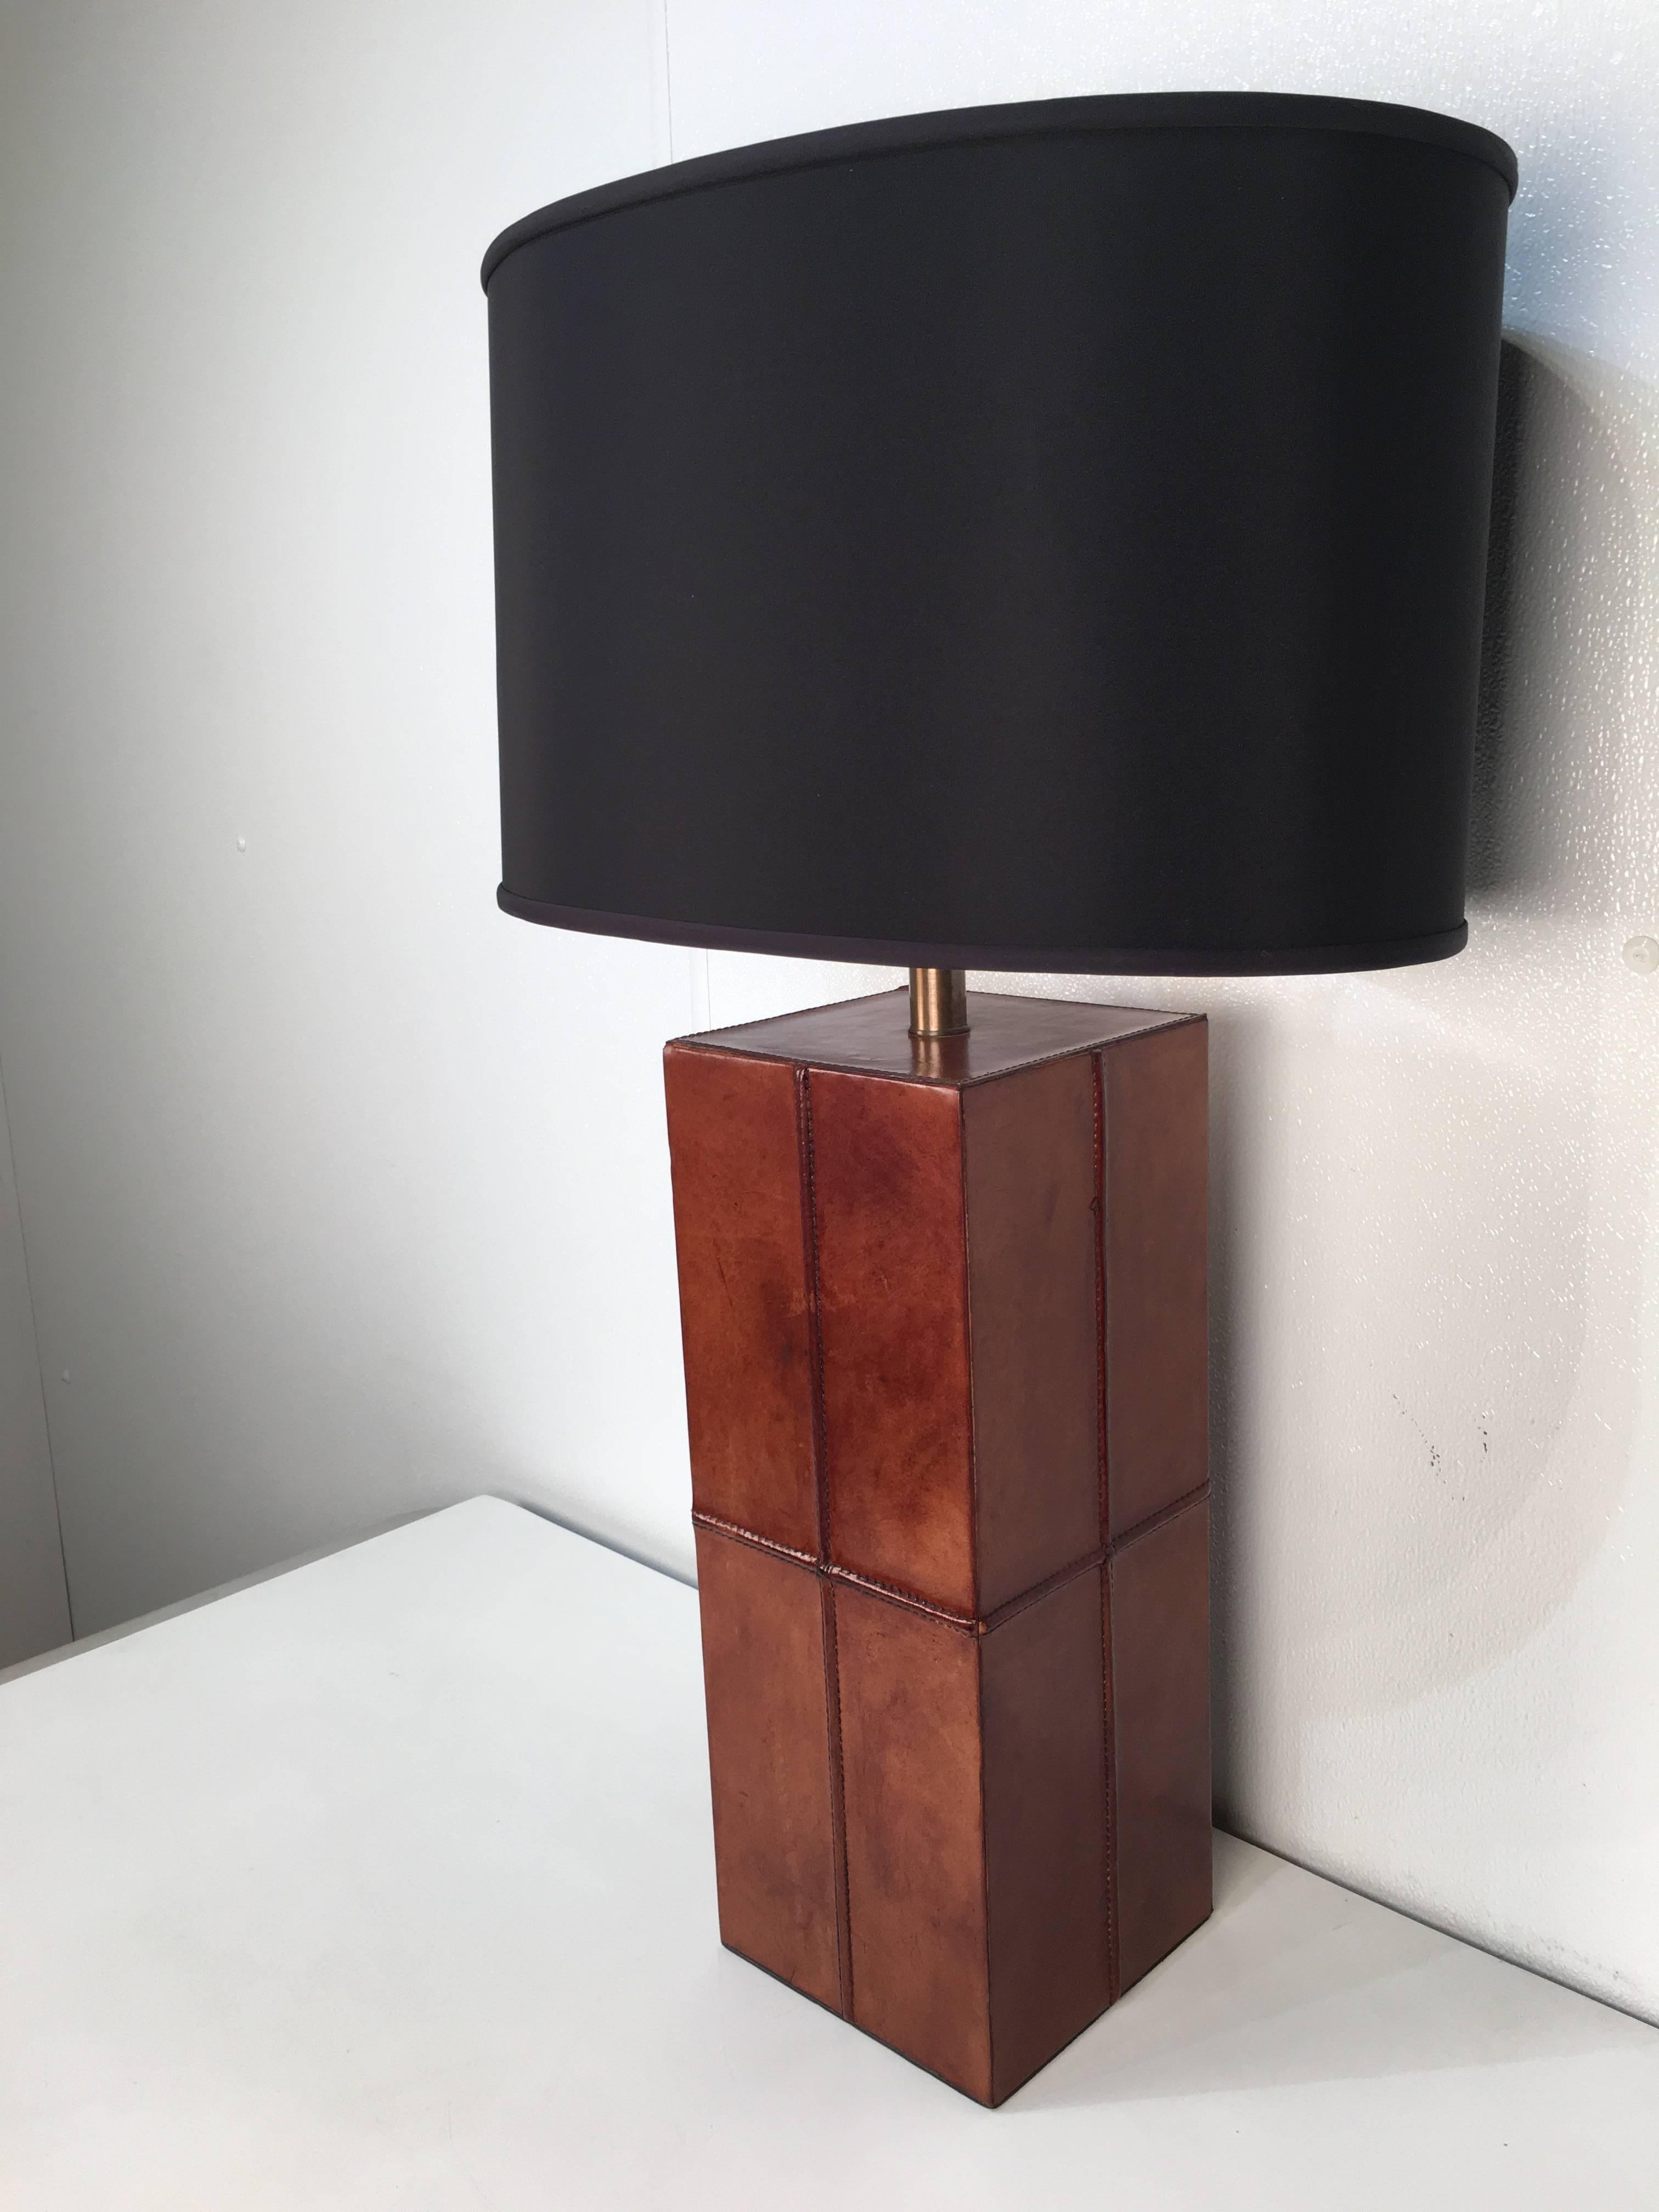 Pair of Stitched Leather Table Lamps In Excellent Condition For Sale In Oaks, PA